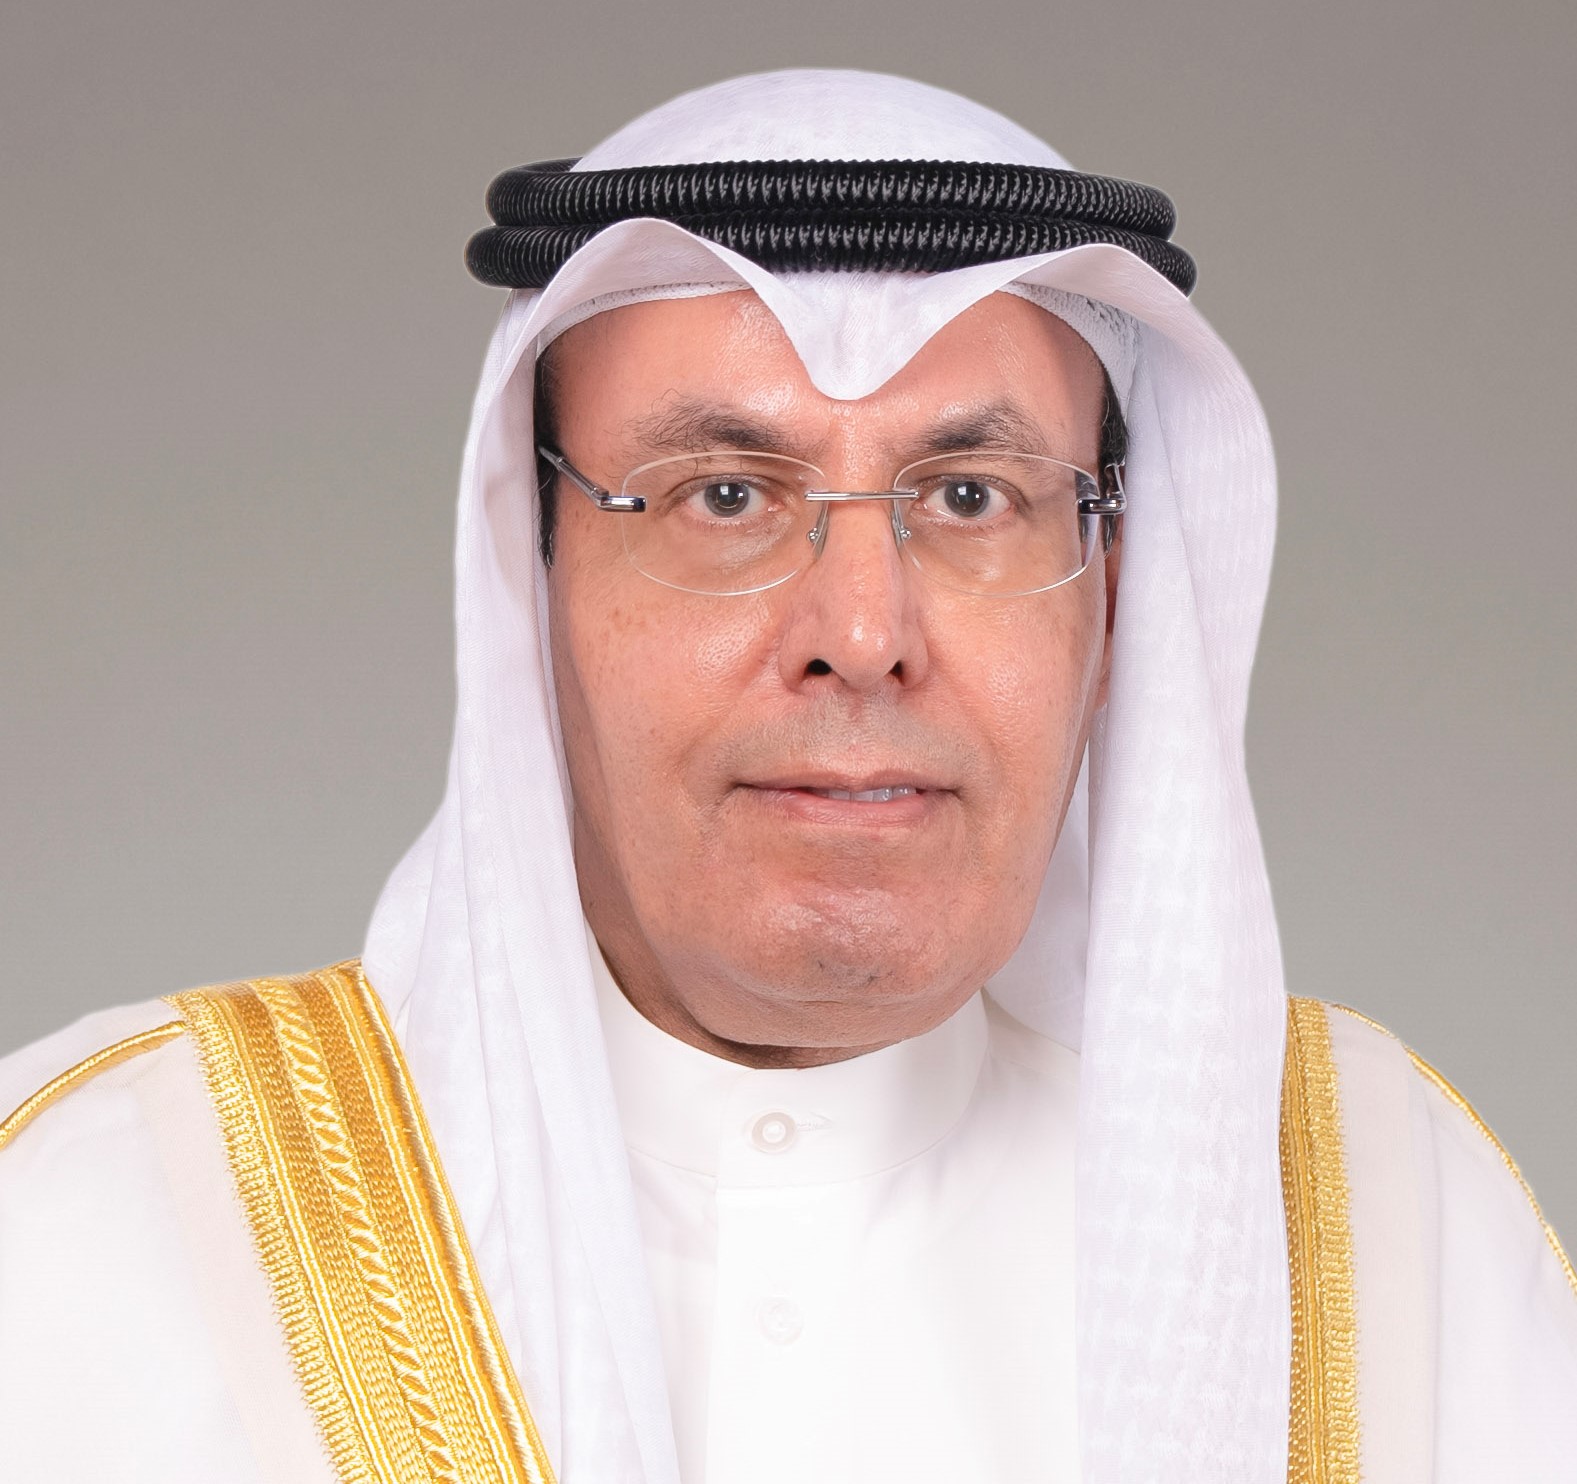 Minister of Education and Higher Education Dr. Hamad Al-Adwani